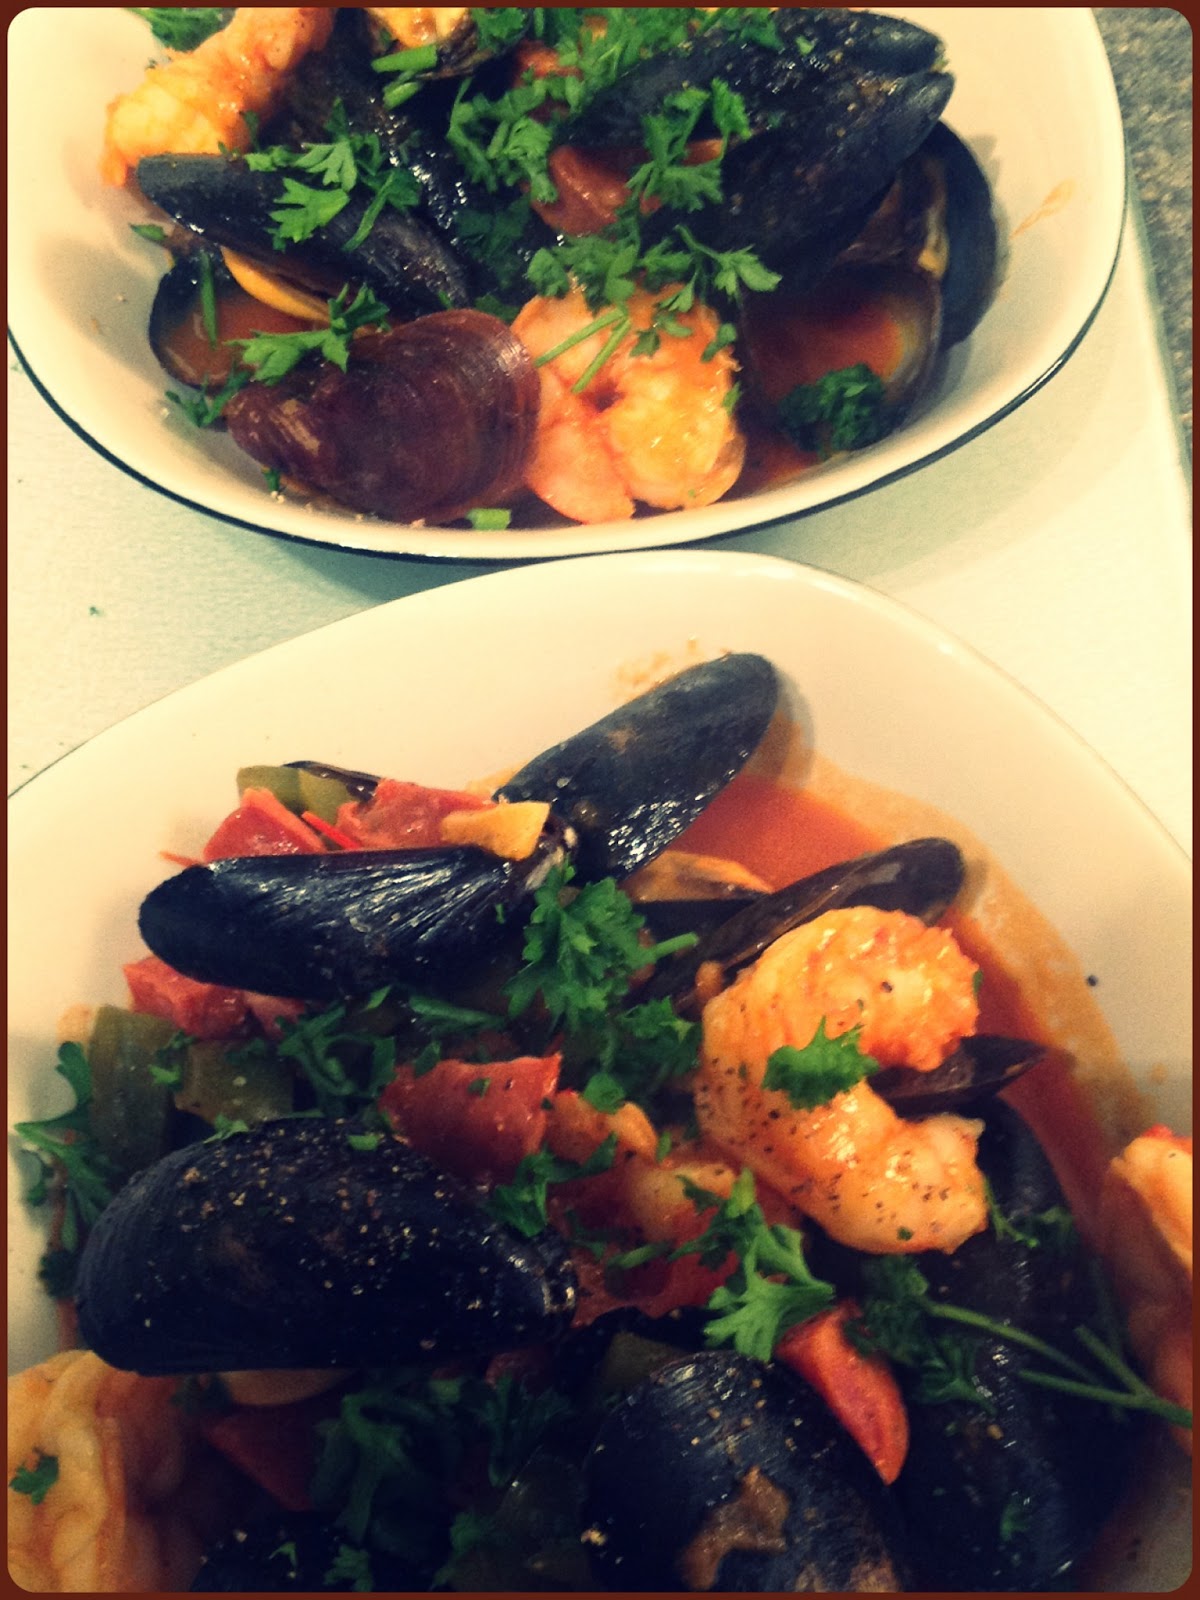 Foodie in a Paleo World: Portuguese Mussels and Shrimp in Chorizo Sauce